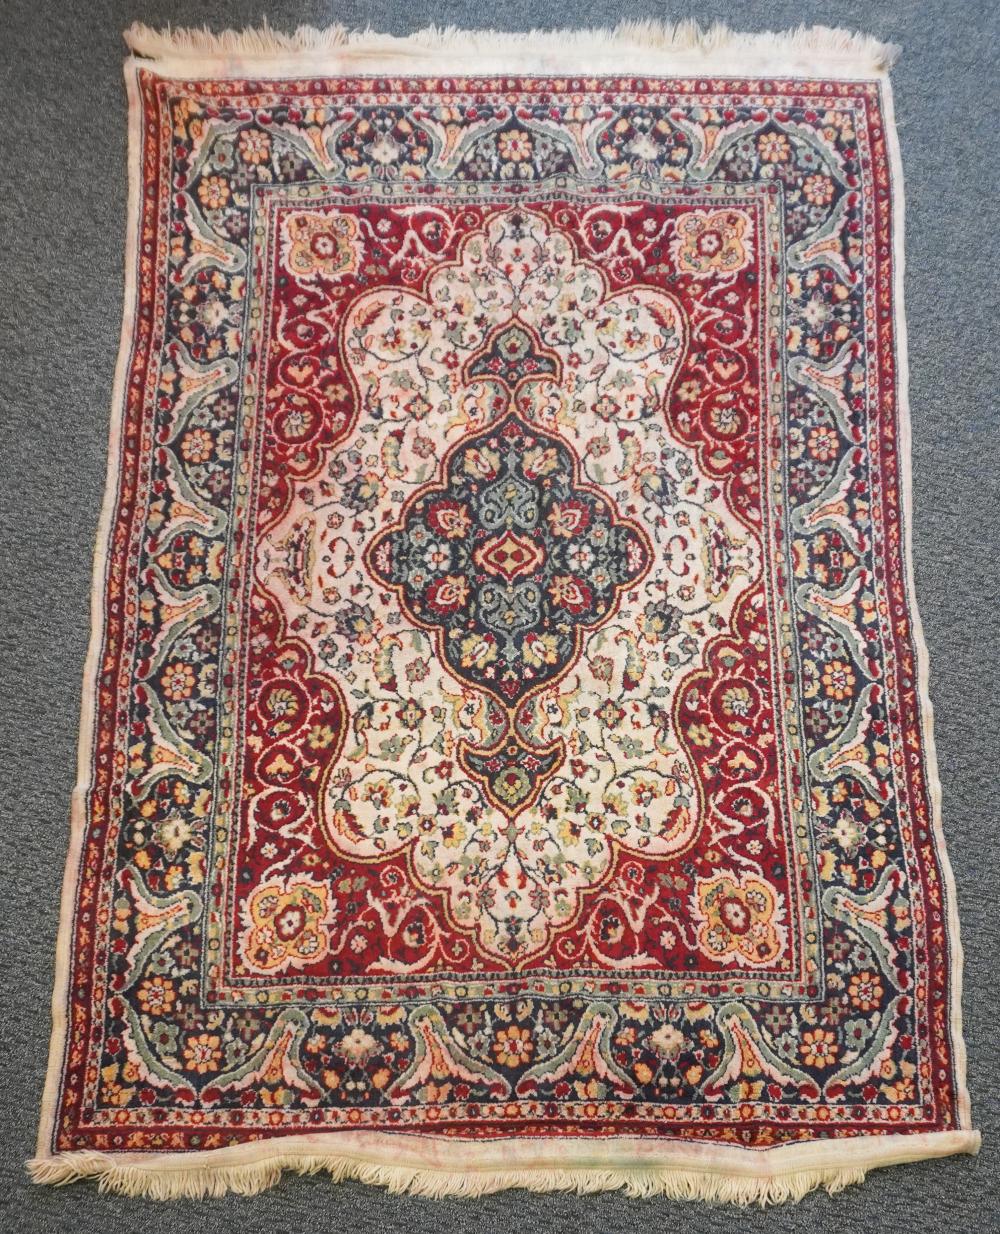 MACHINE MADE RUG, 7 FT 1 IN X 4